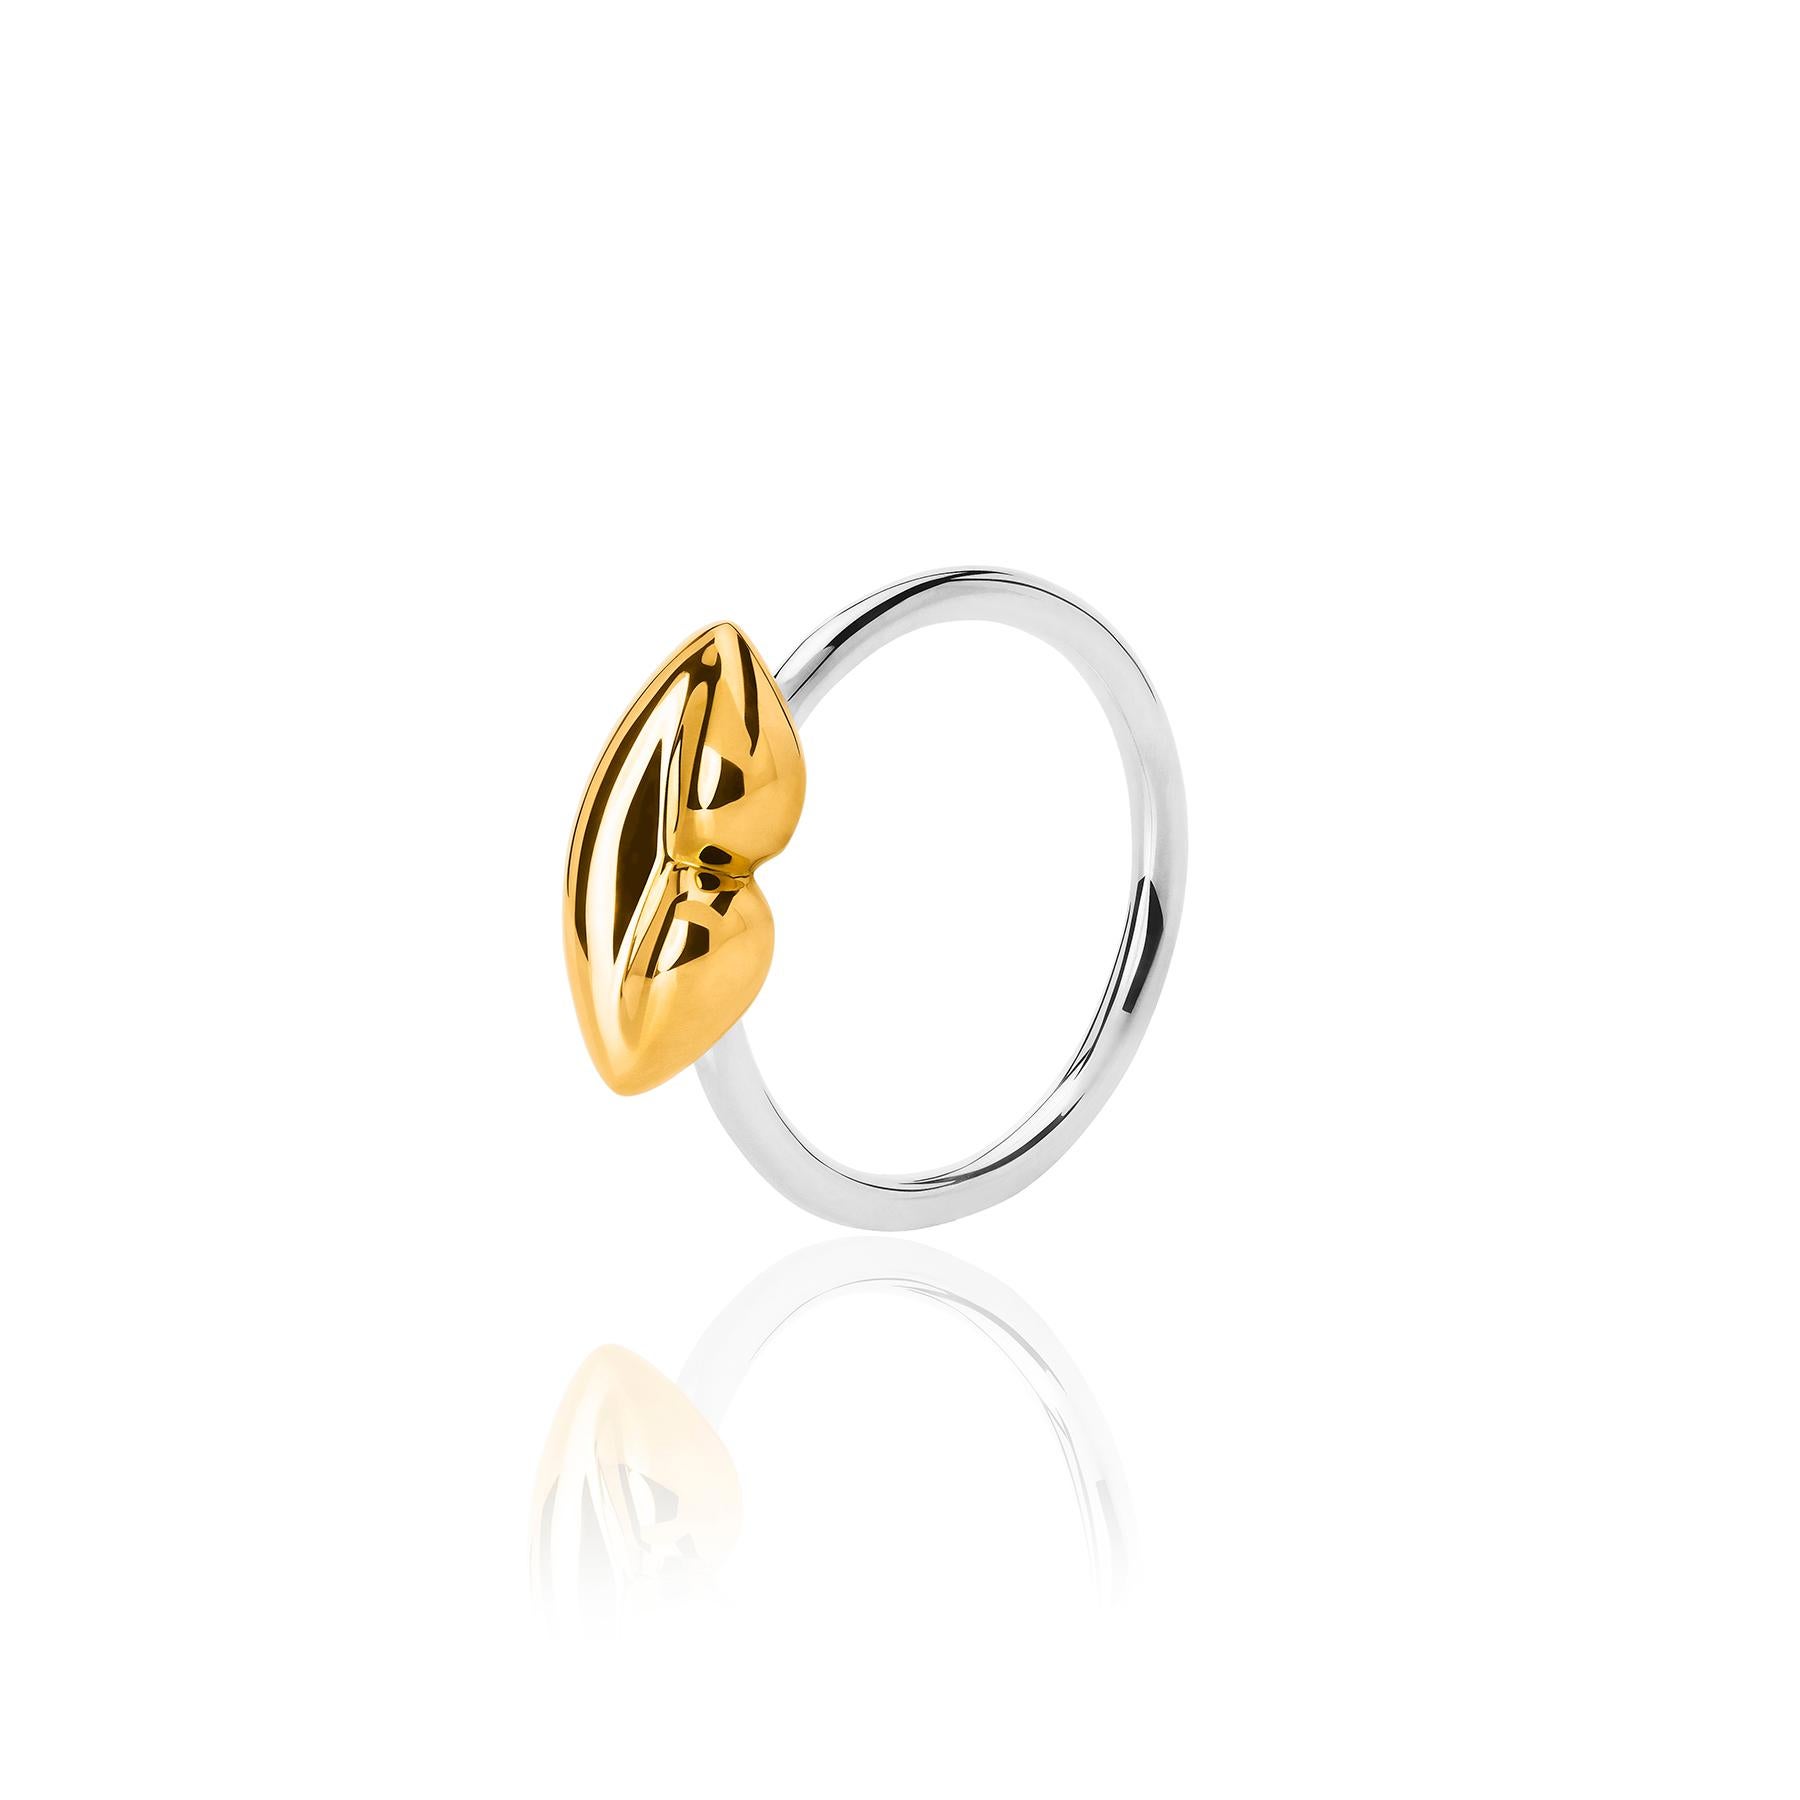 The Bésame Solitaire Vermeil Ring from the Bésame collection by TANE is made in sterling silver with 23 karat yellow gold vermeil. An elegant plain hoop is topped by a kiss finished in vermeil, gently sculpted in TANE's vision, the way to give a